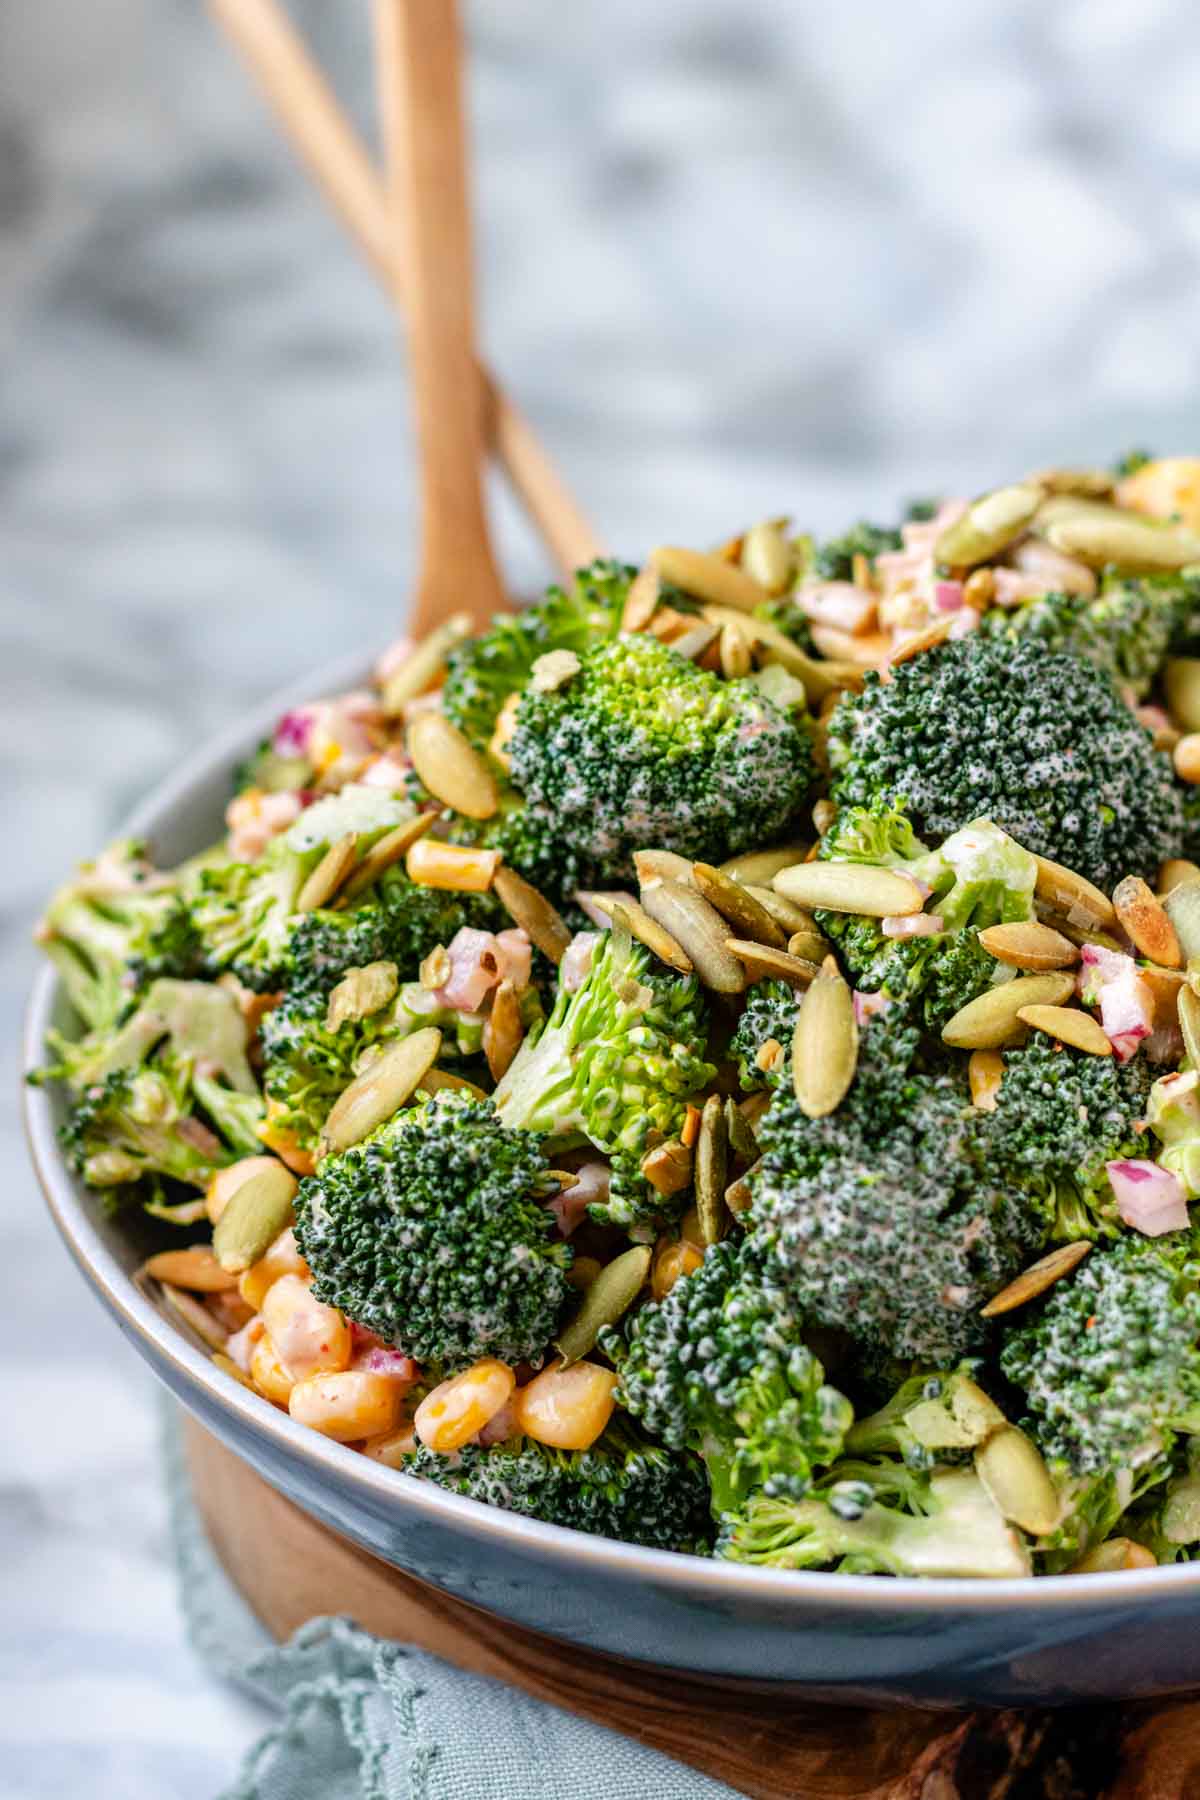 A bowl of broccoli, pepitas, and red onion coated in dressing.